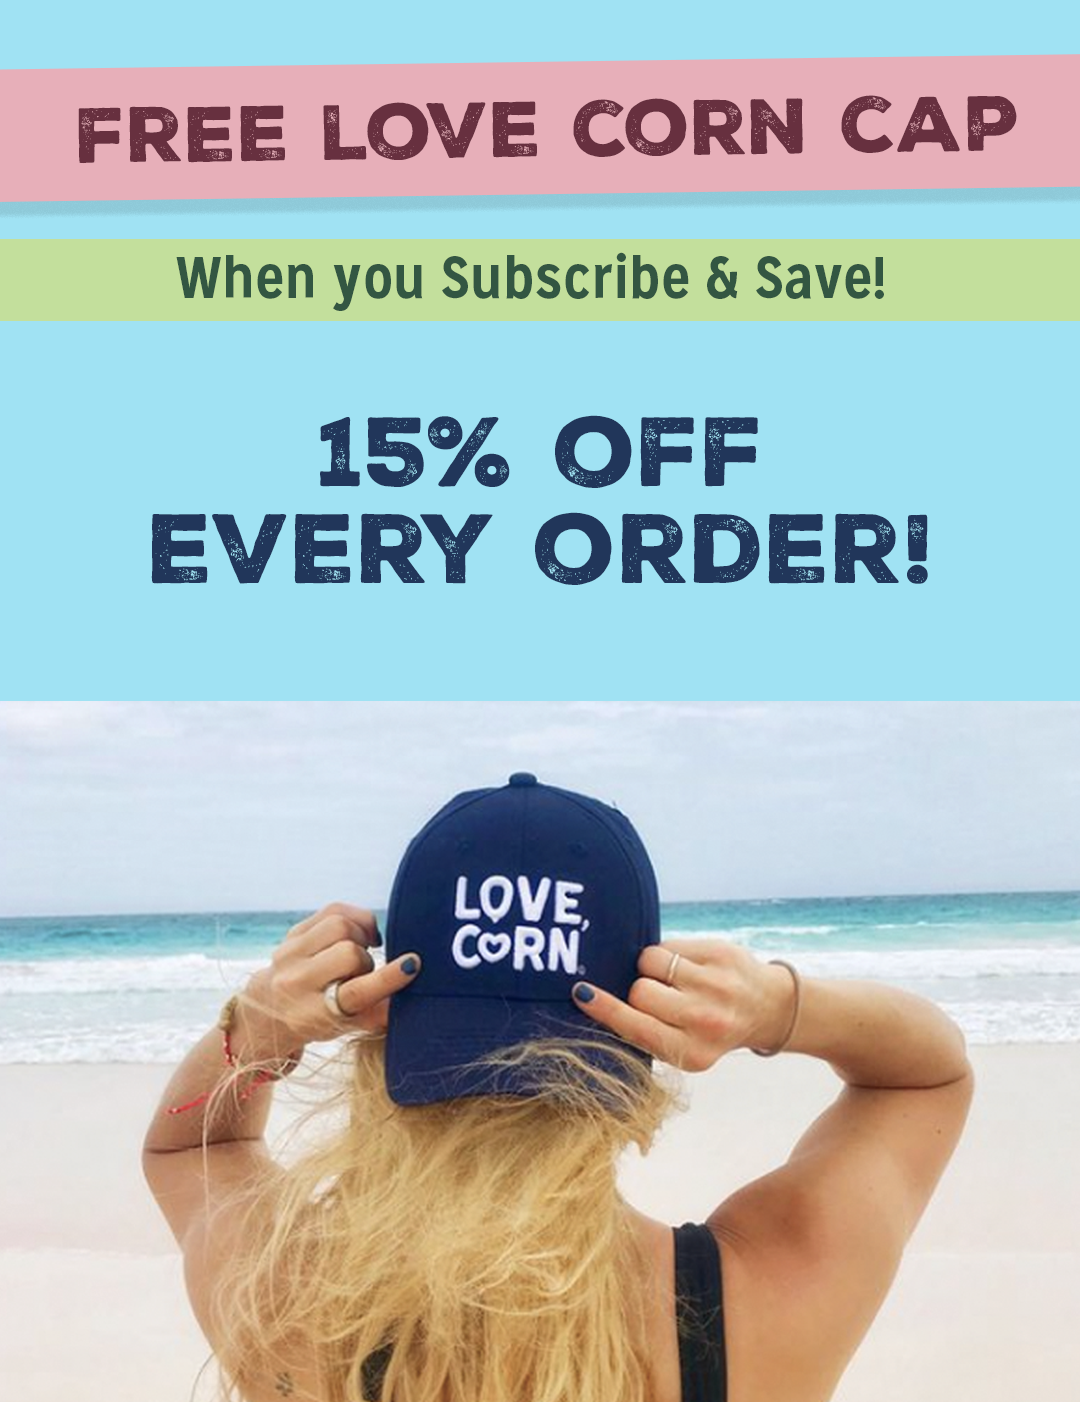 Free Love Corn hat when you subscribe & save